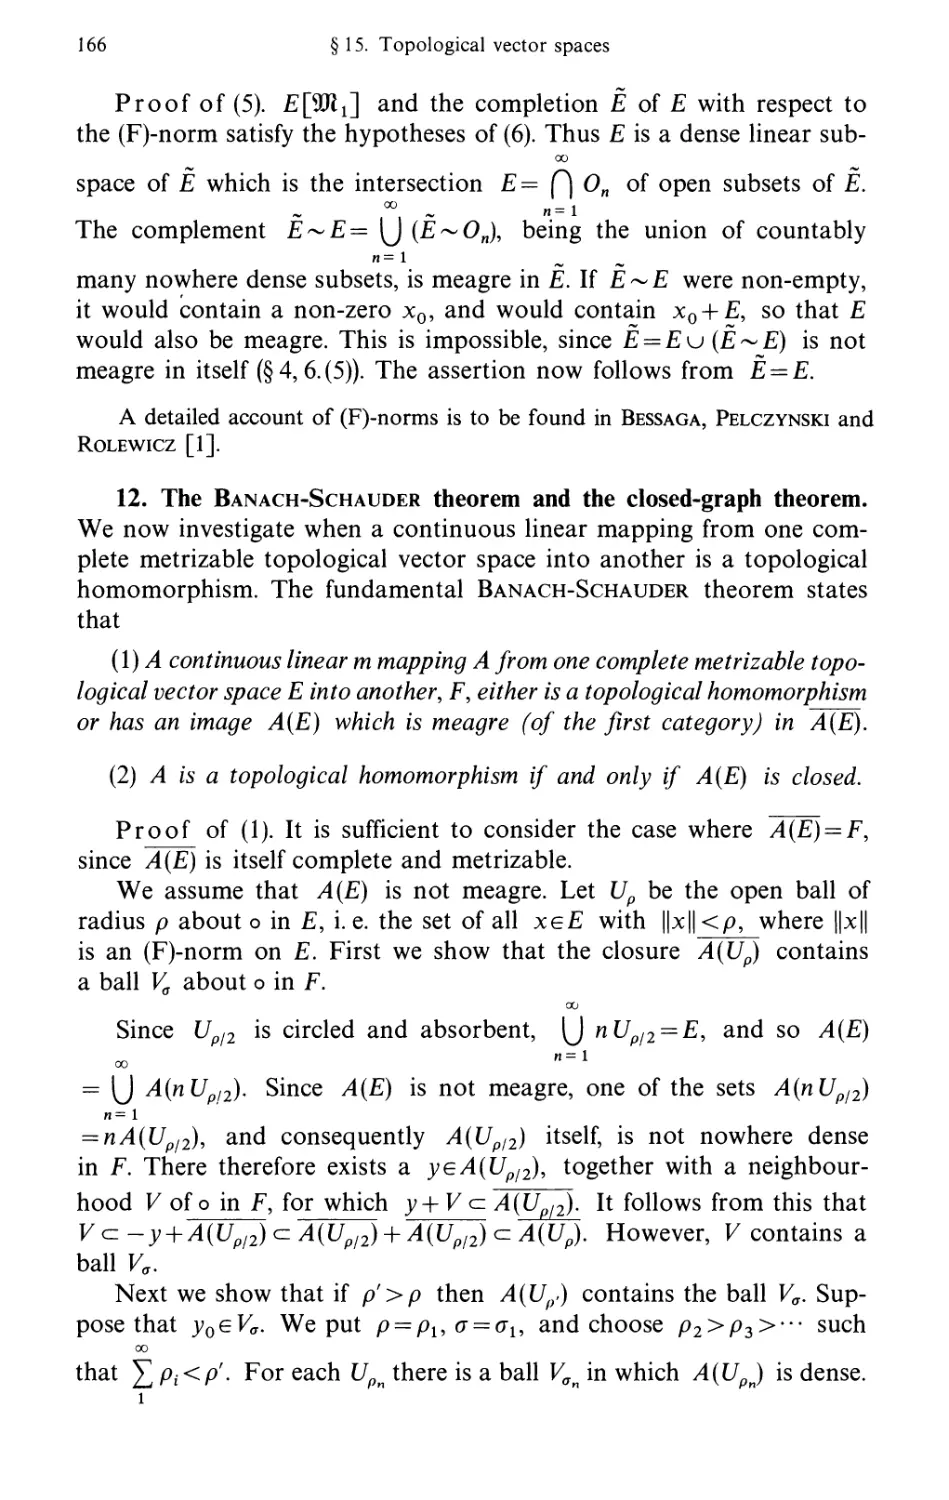 12. The Banach-Schauder theorem and the closed-graph theorem